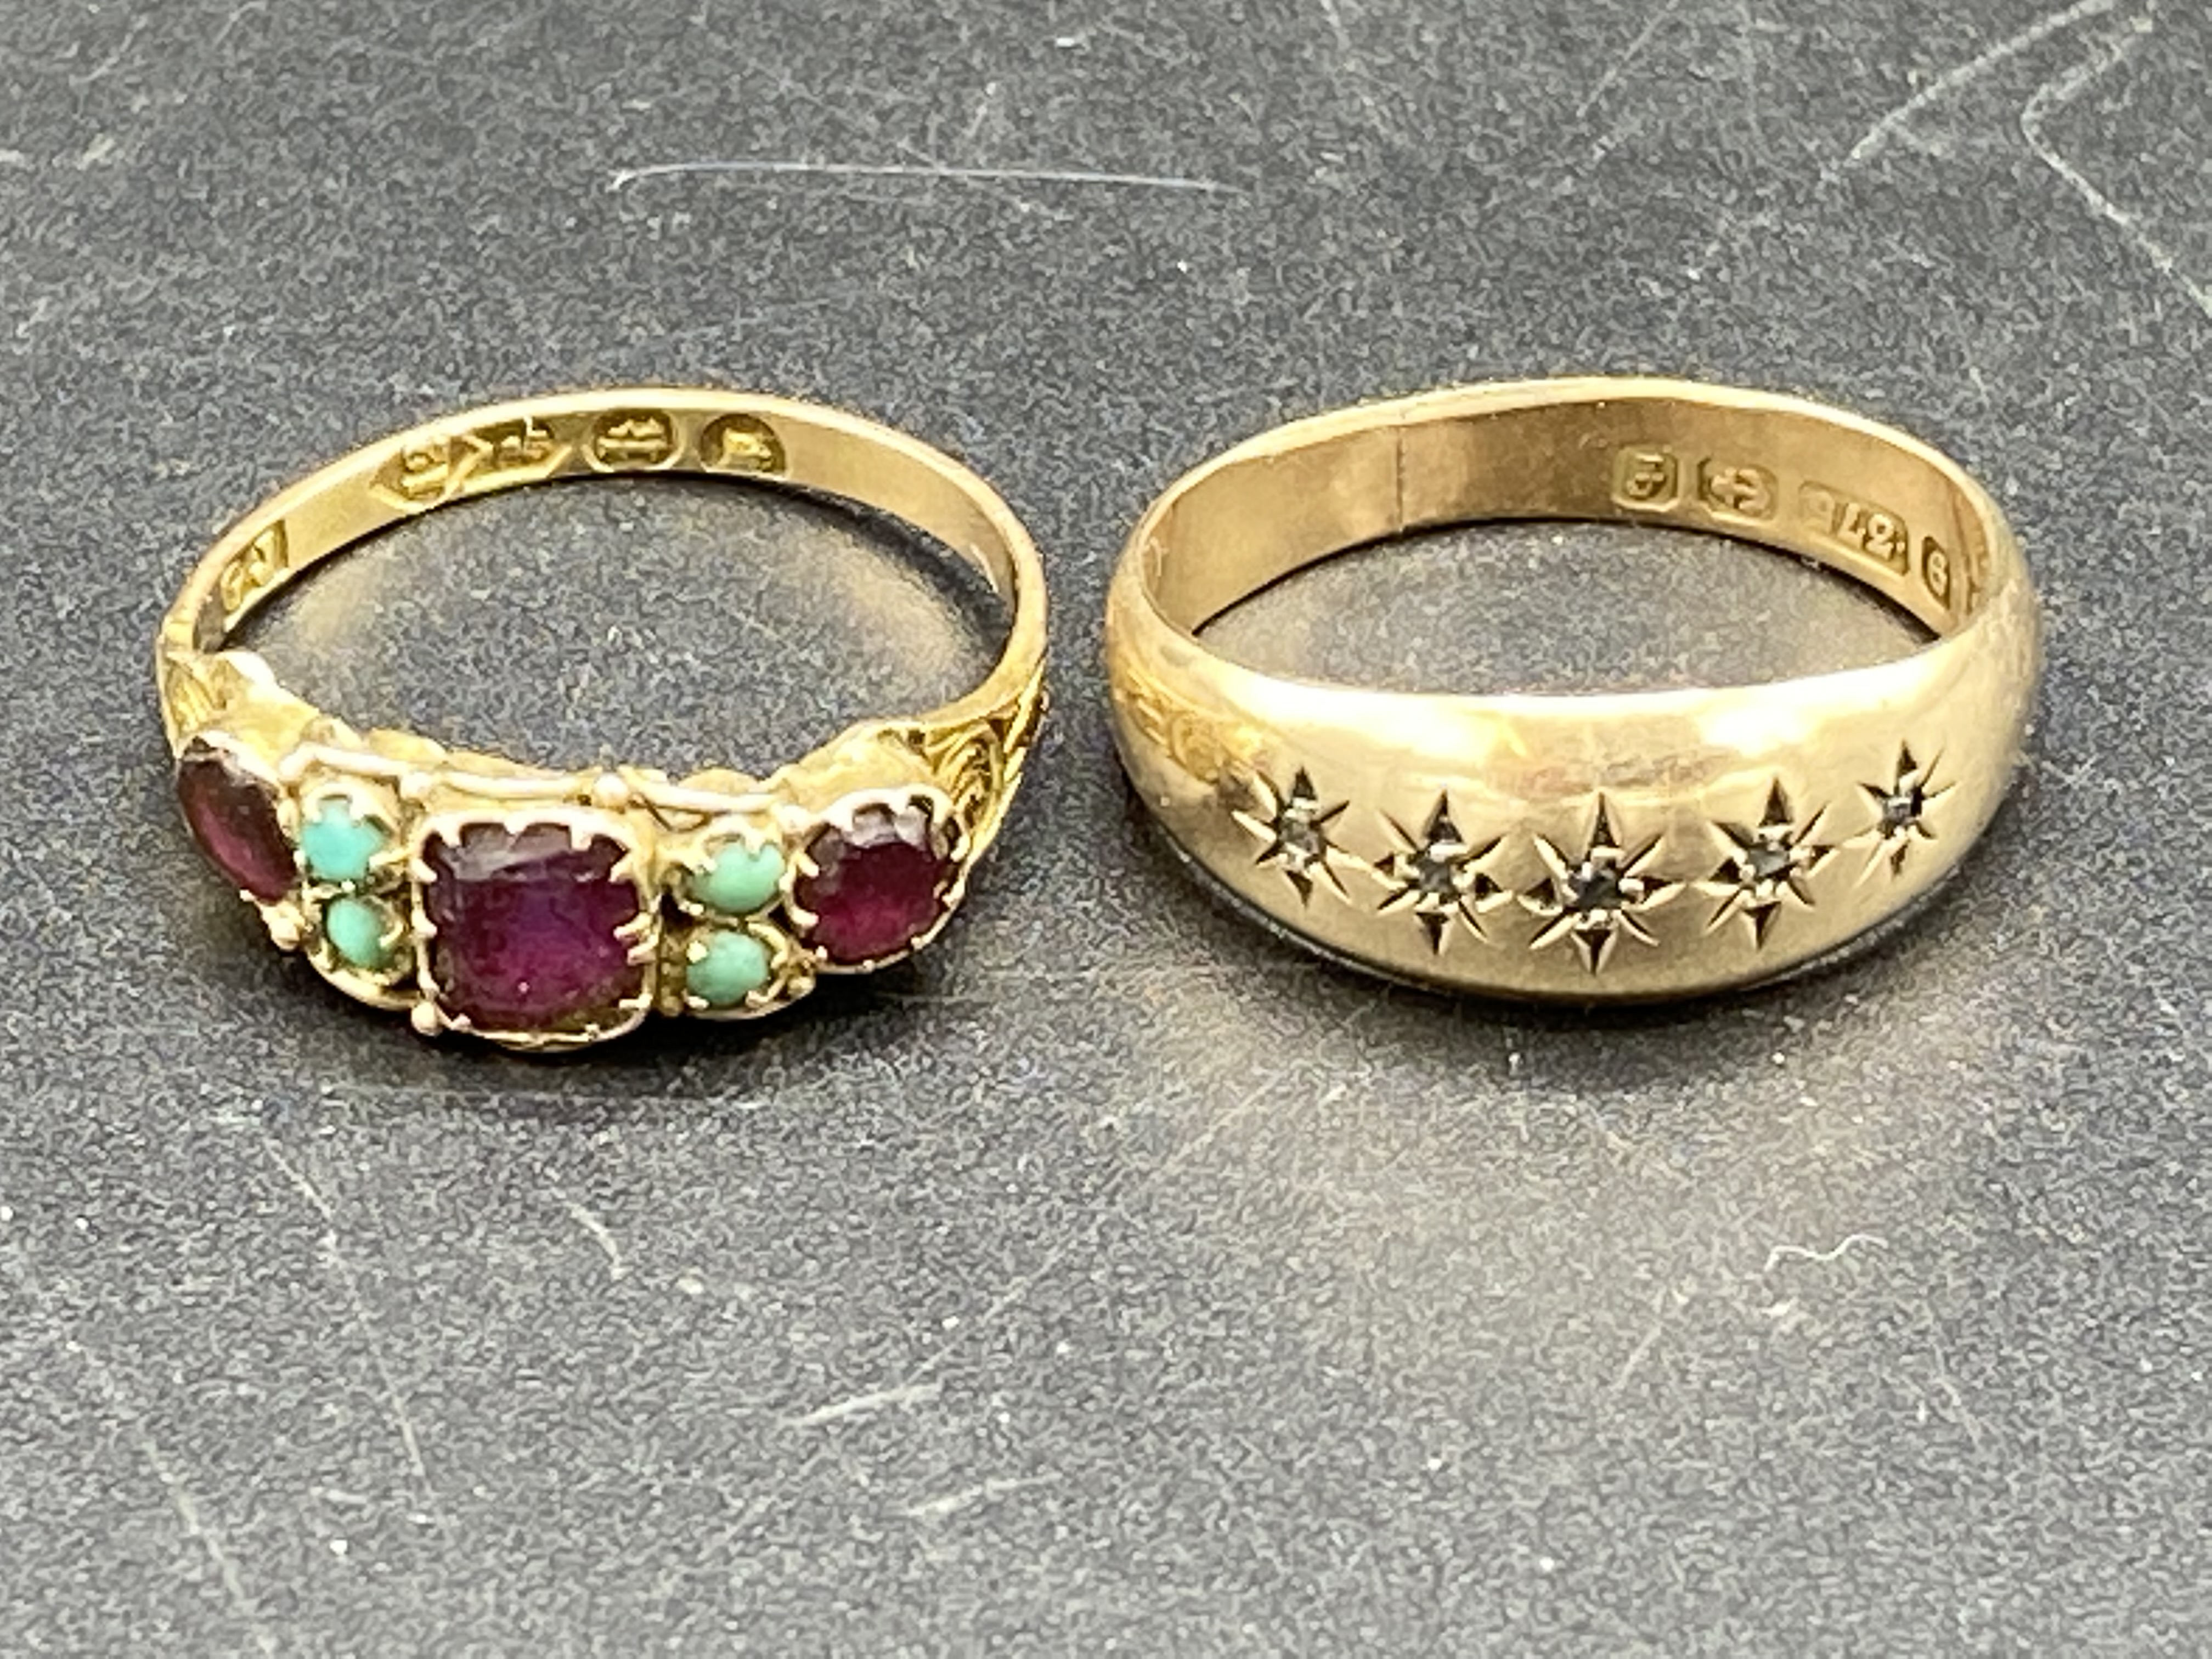 Victorian ruby and green cabochon 12ct gold ring and an Edwardian 9ct gold ring - Image 5 of 5